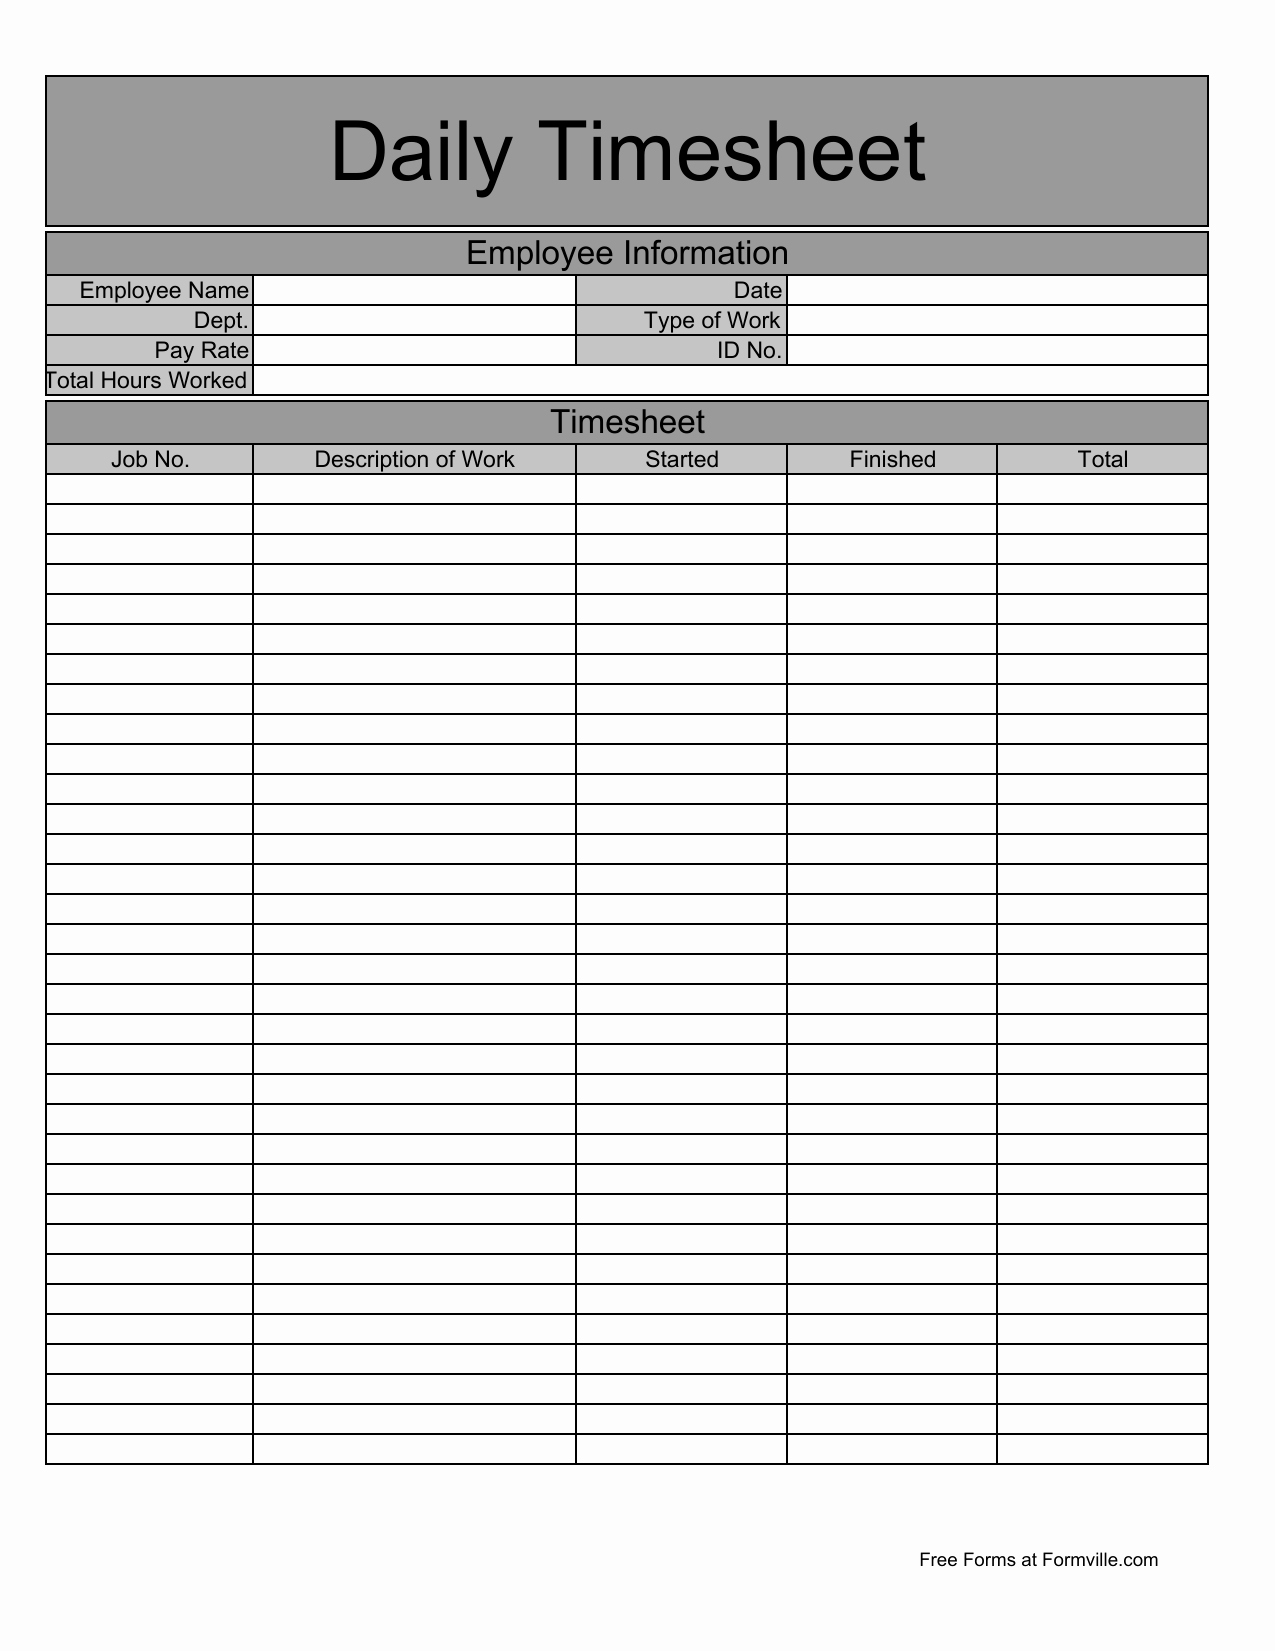 Daily Time Sheet Template Excel Beautiful Download Daily Timesheet Template Excel Pdf